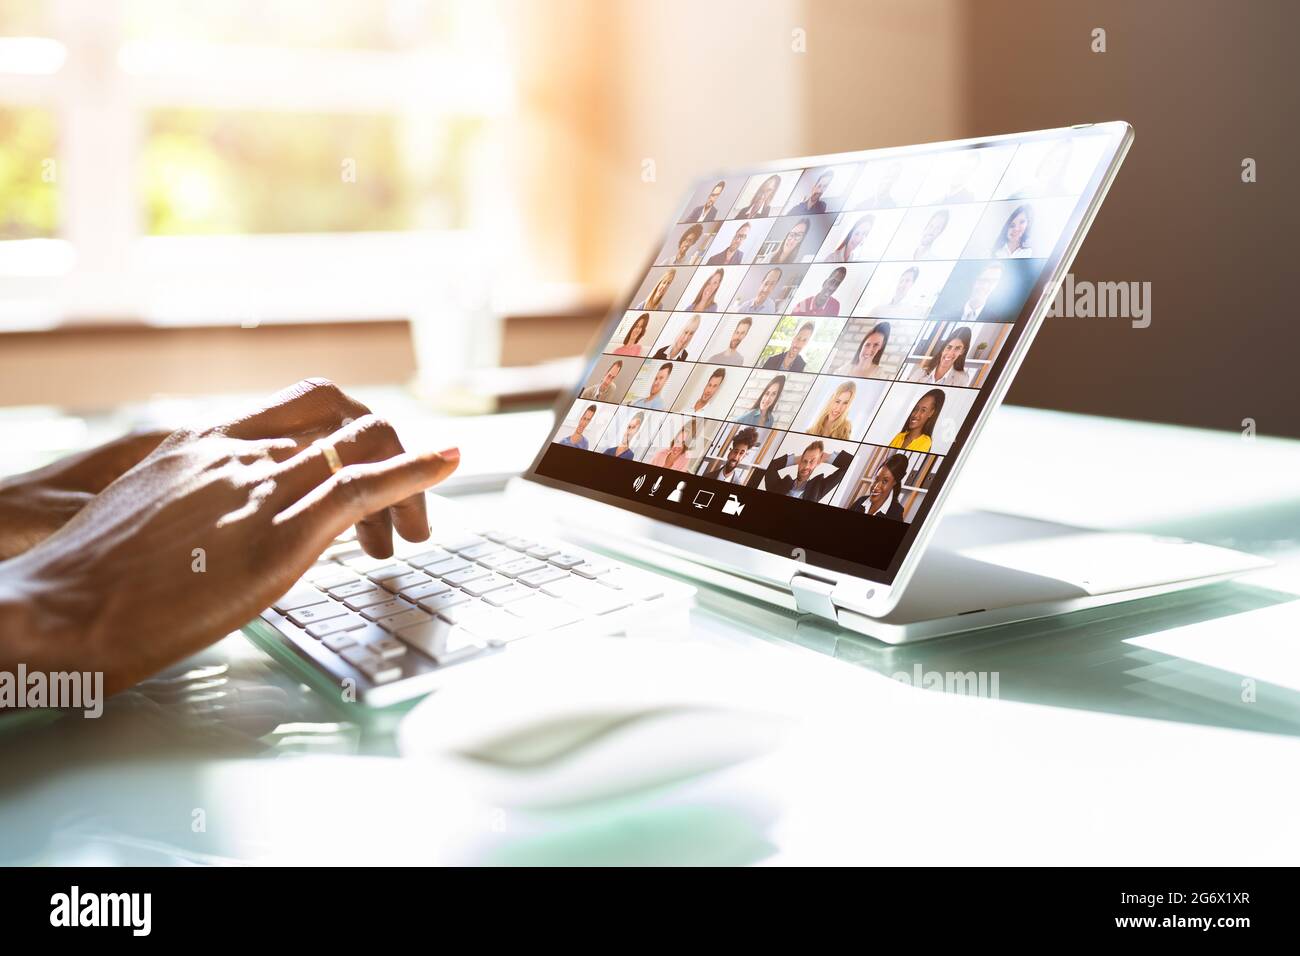 African American Watching Video Conference Business Webinar Stock Photo